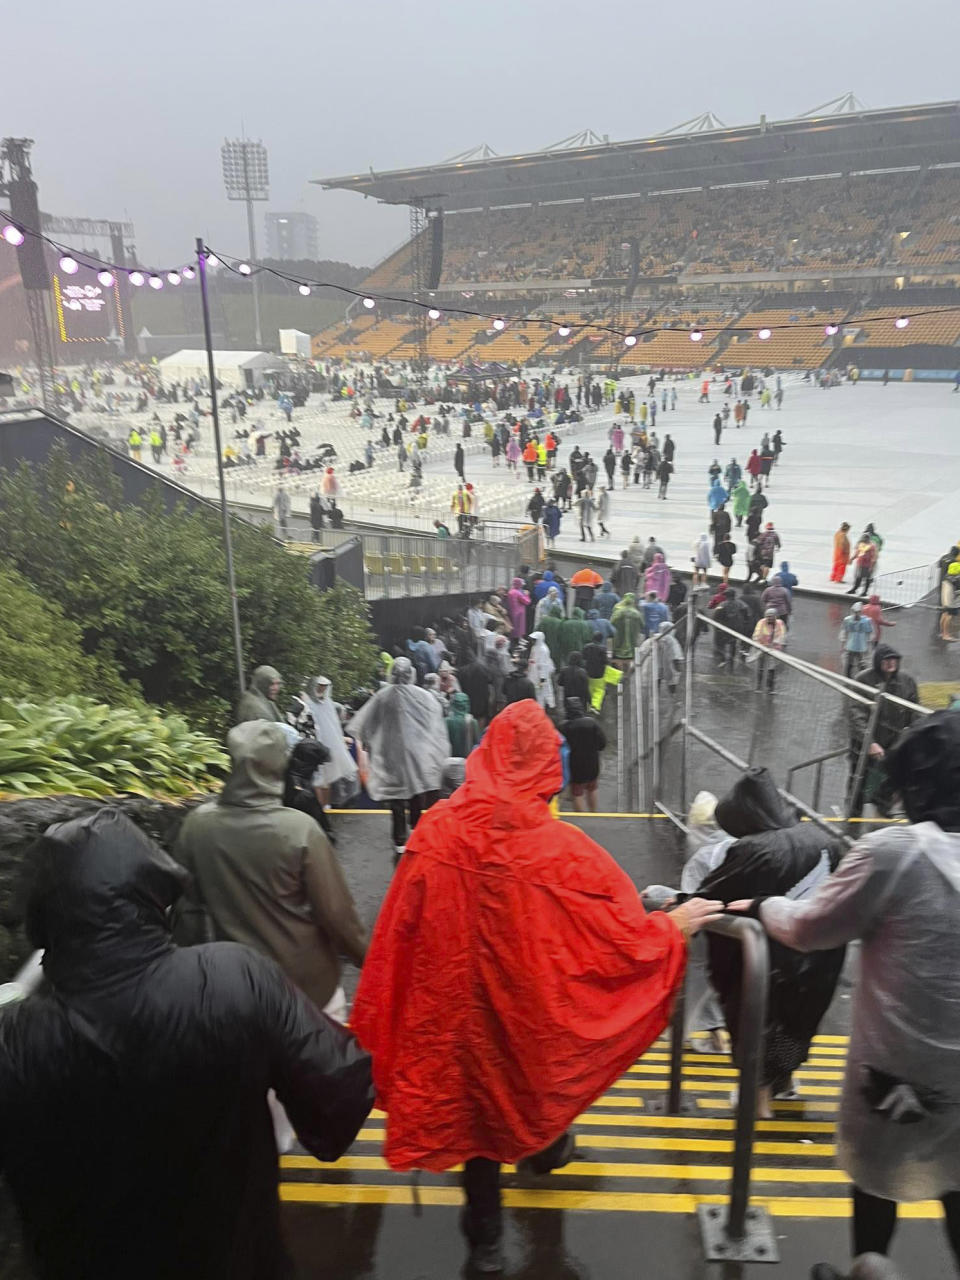 Fans leave Mt Smart Stadium in Auckland, New Zealand, Friday, Jan. 27, 2023, where about 40,000 people were expected to attend an Elton John concert. Torrential rain and wild weather in Auckland causes disruptions throughout the city and an Elton John concert to be canceled just before it was due to start. (Julea Dalley/New Zealand Herald via AP)